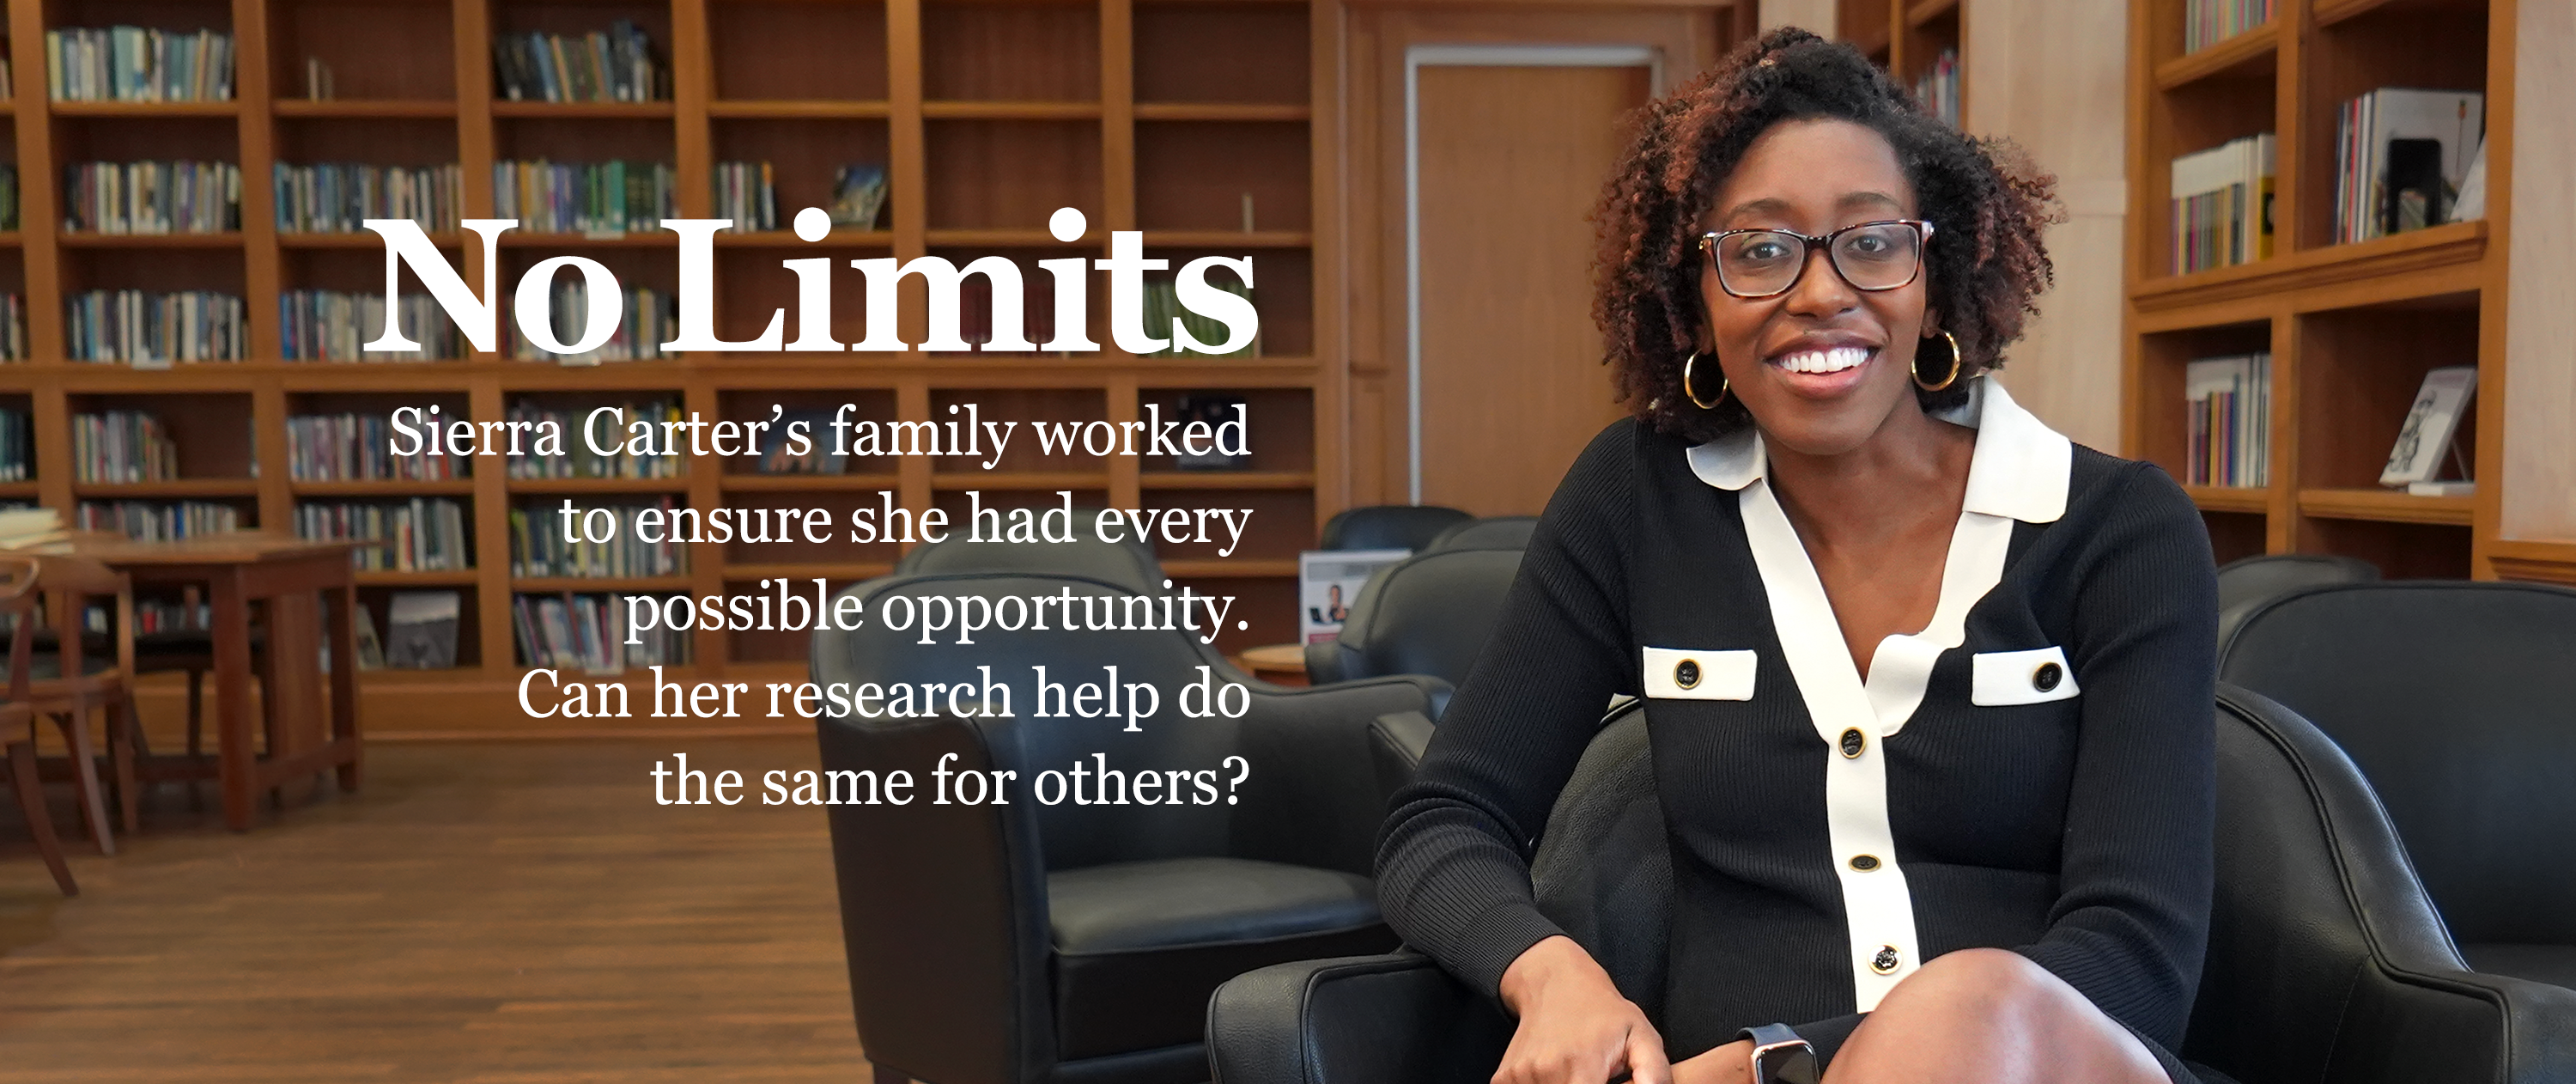 No Limits. Sierra Carter's family worked to ensure she had every opportunity. Can her research help do the same for others?